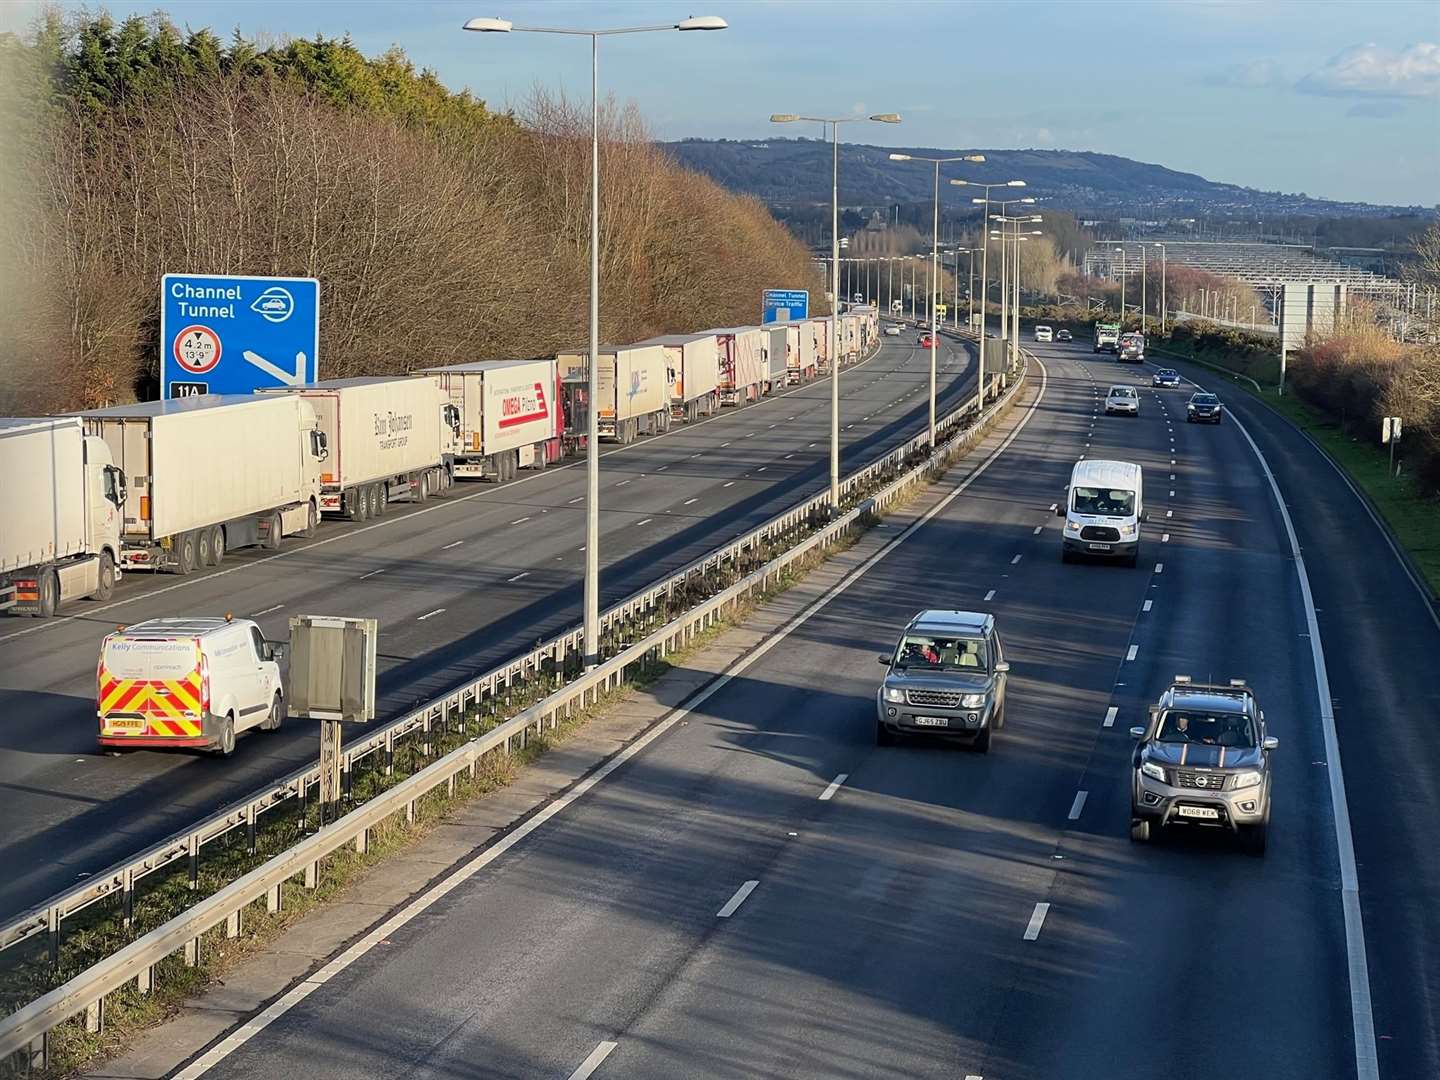 Lorries queuing on the approach to the Channel Tunnel terminal in Folkestone as delays hit the port due to strikes in France. Picture: Barry Goodwin